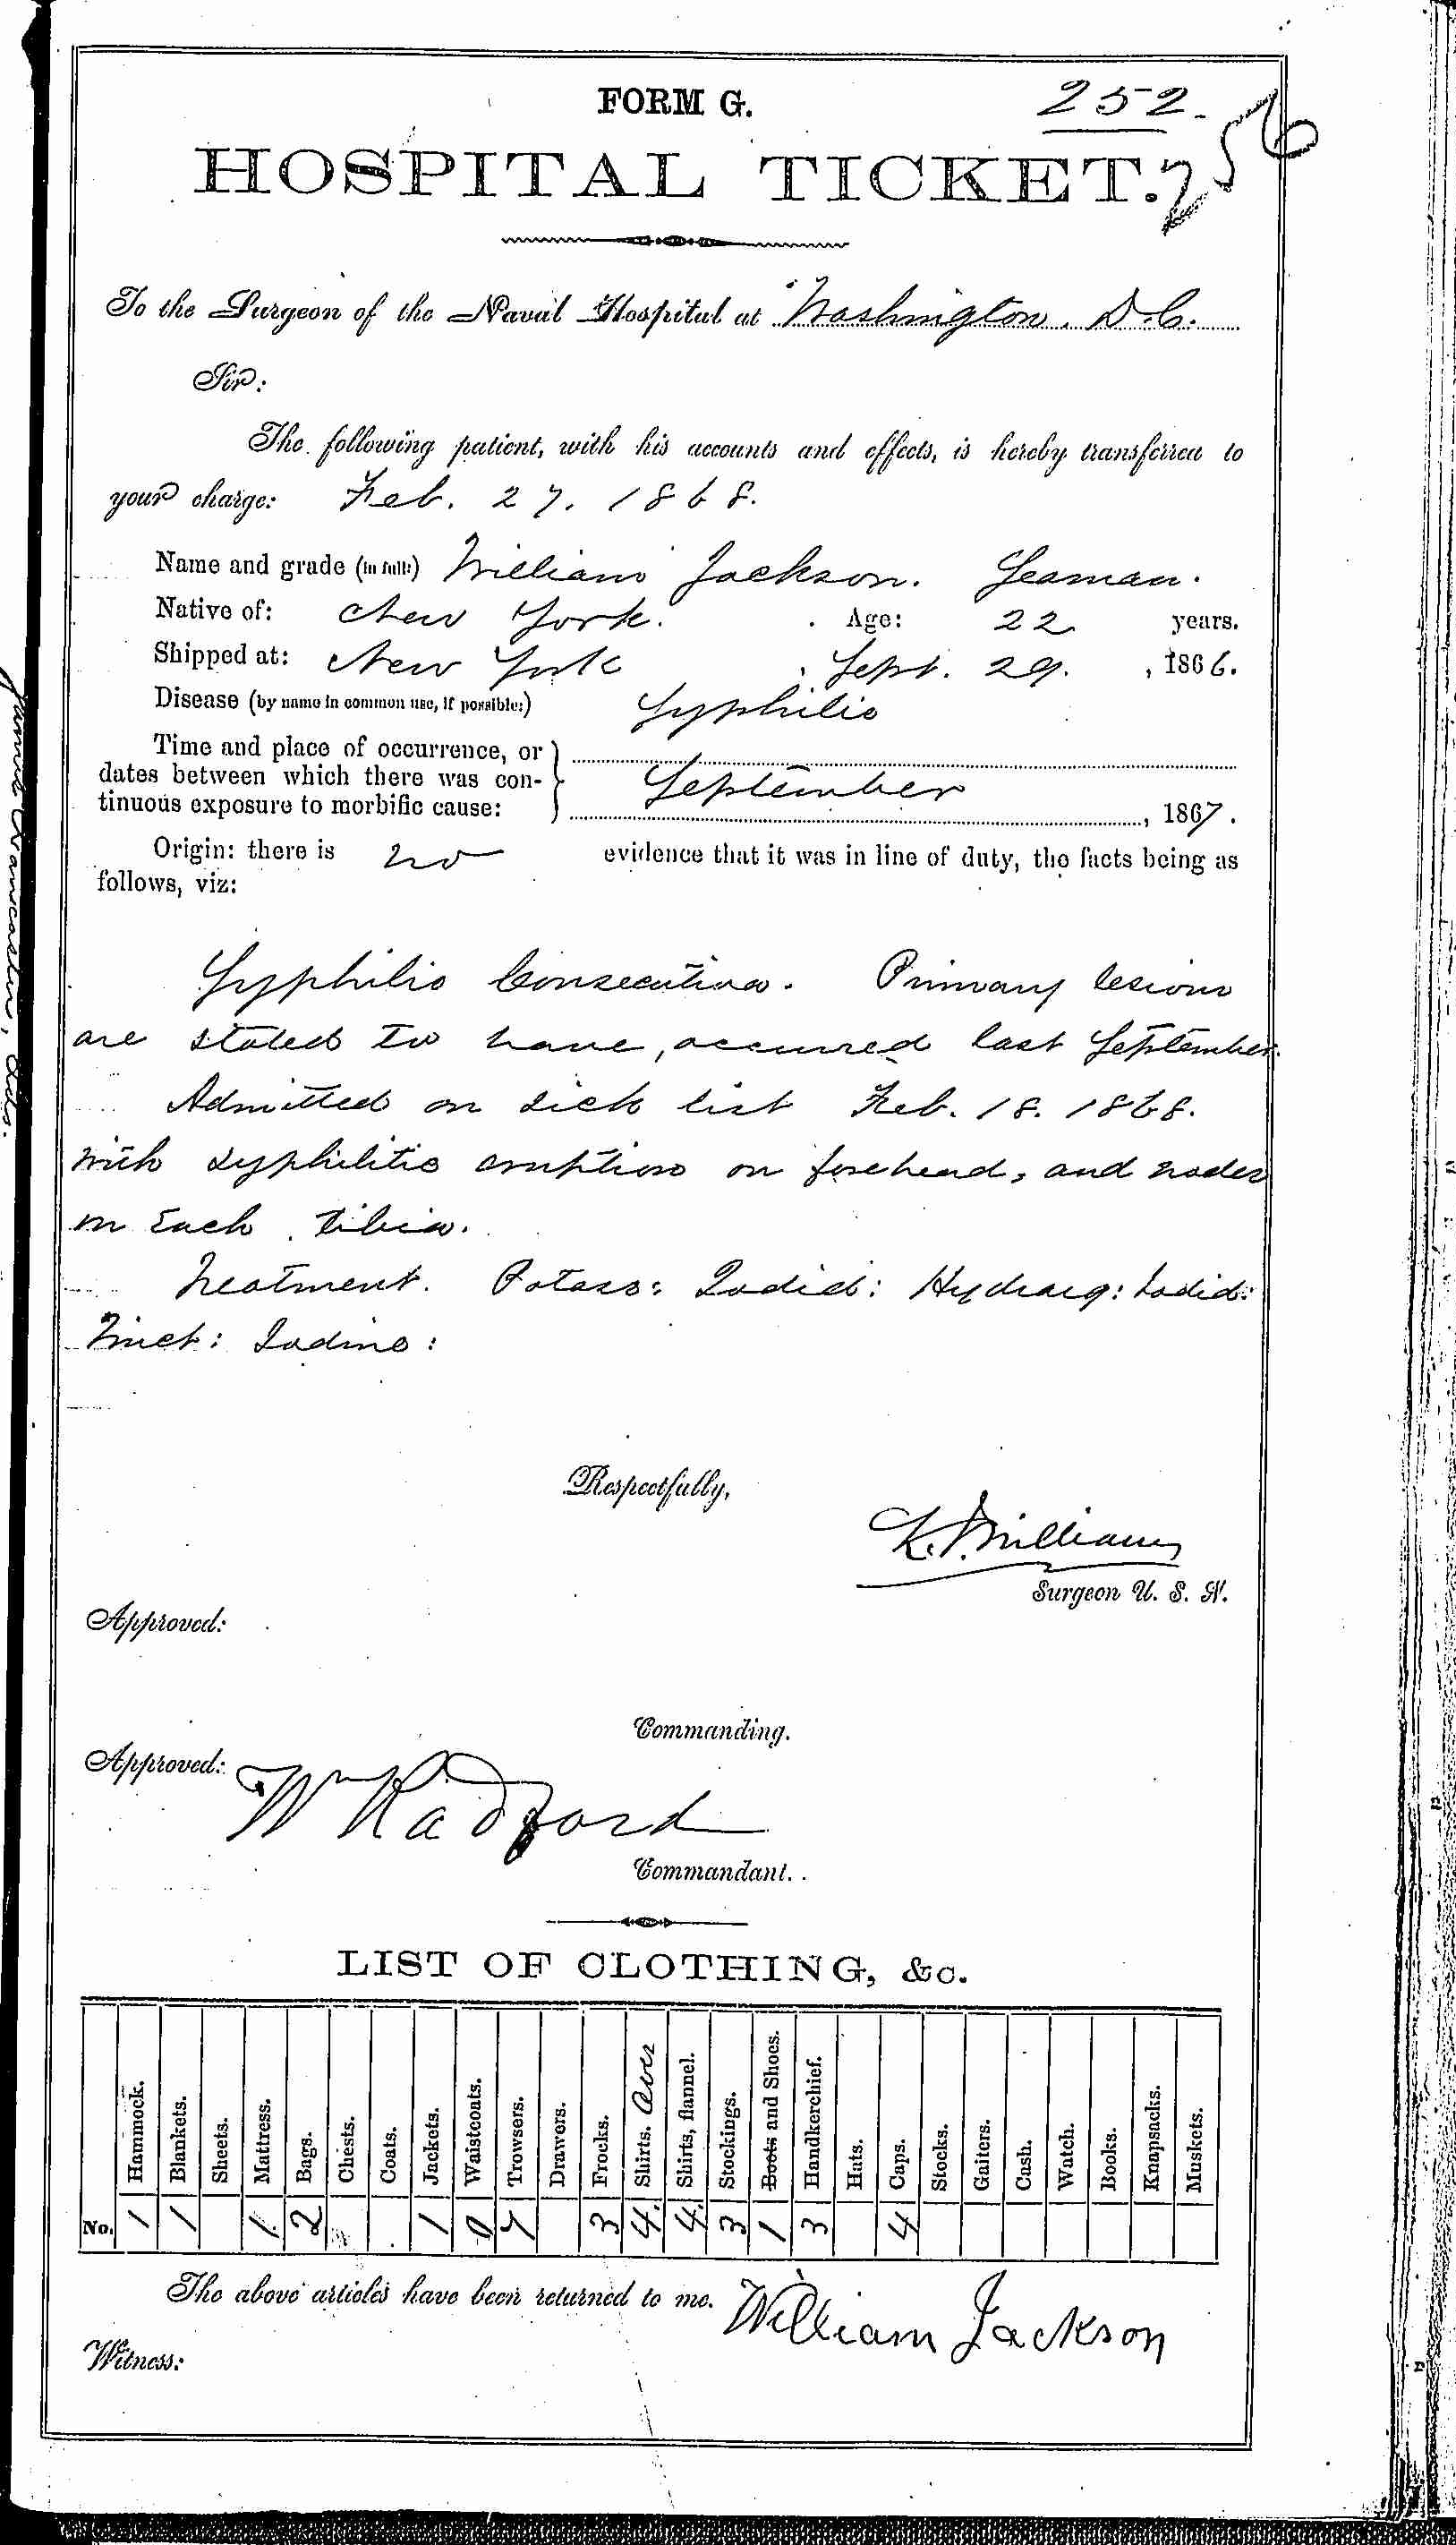 Entry for William Jackson (second admission - page 1 of 2) in the log Hospital Tickets and Case Papers - Naval Hospital - Washington, D.C. - 1866-68